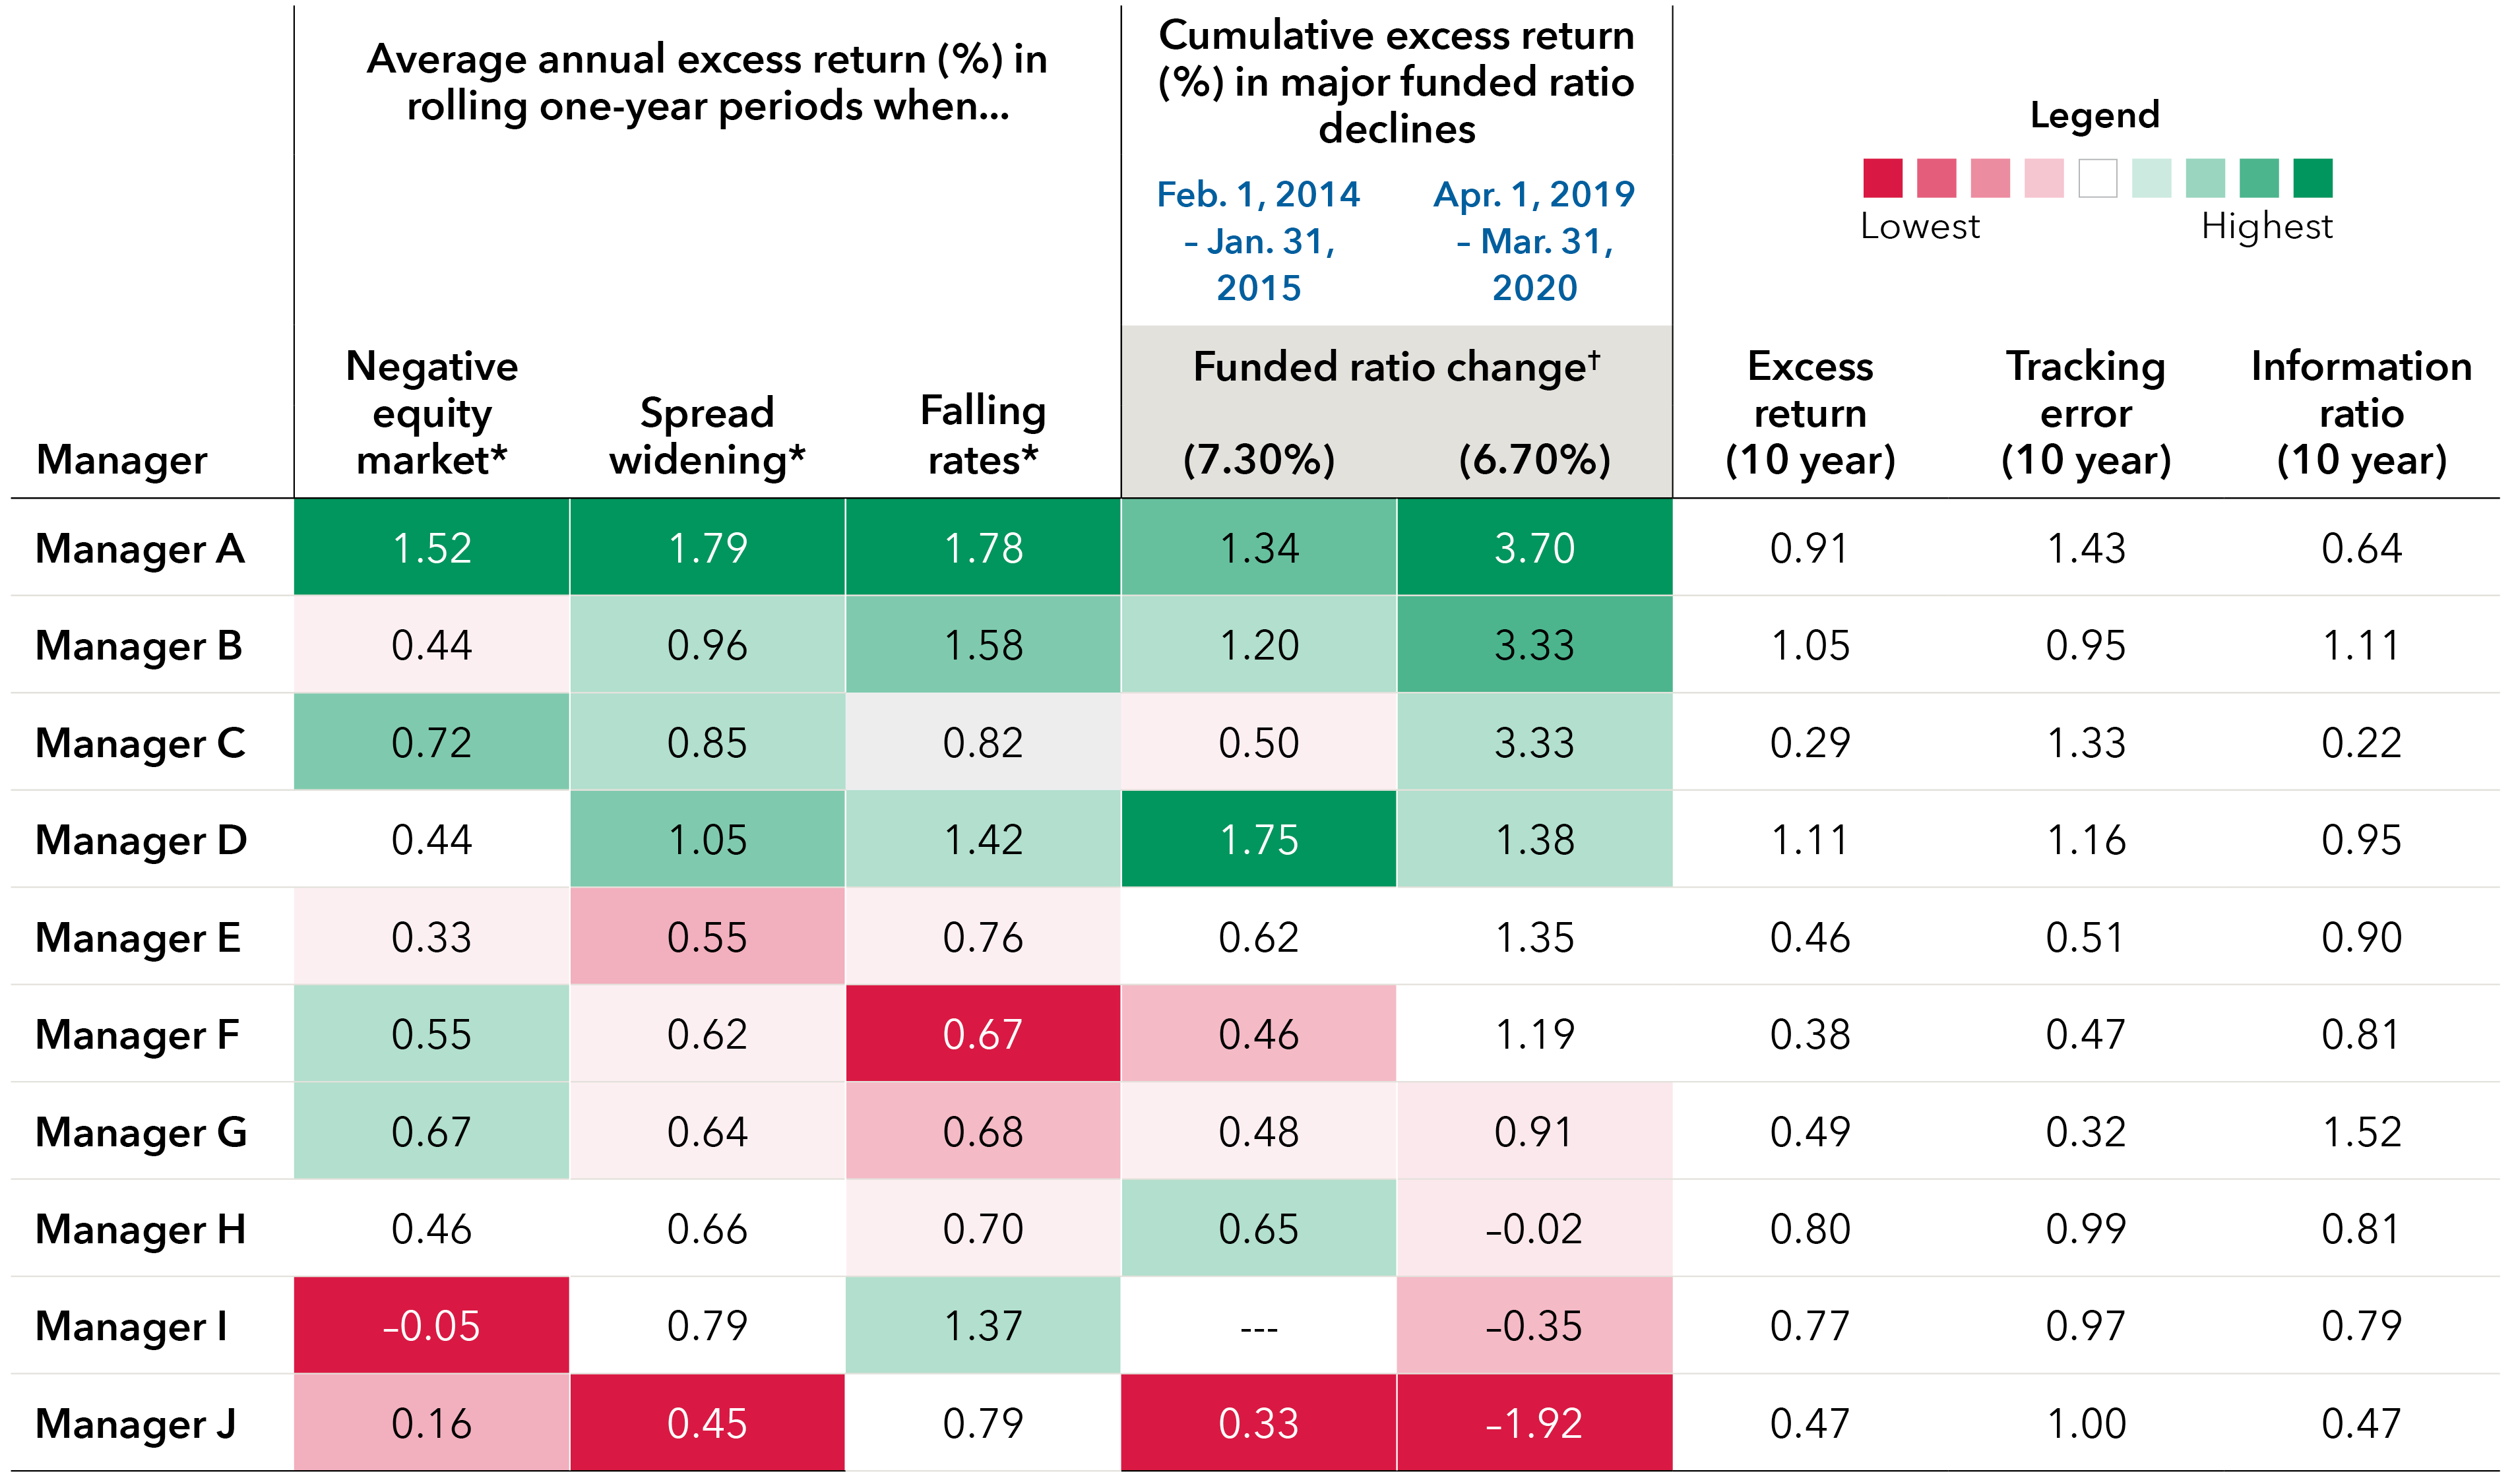 Table displays average annual excess returns for 10 anonymized investment managers (A through J) when there was a negative equity market, spread widening or falling interest rates during rolling one-year periods over the 10 years ended December 31, 2023. It also shows 10-year excess return, tracking error and information ratio for all 10 managers. Lastly, it shows the managers' cumulative excess returns in two major funded ratio declines that occurred from February 1, 2014, to January 31, 2015, and April 1, 2019, to March 31, 2020. Broadly speaking, returns during the three types of market stress periods were best for the managers at the top of the table (starting with manager A) and worst for those at the bottom (ending with manager J). The highest return on the table was manager A's 3.70% excess return in the 2019-2020 funded ratio decline, and the lowest was the negative 1.92% return for manager J during the same event. Manager D had the highest 10-year excess return of 1.11% and manager C had the lowest at 0.29%. Manager A had the highest 10-year tracking error at 1.43 and manager G had the lowest at 0.32. Manager G had the highest 10-year information ratio at 1.52, and manager C had the lowest at 0.22. Comparing managers A and J, manager A had a 10-year excess return, tracking error and information ratio of 0.91, 1.43 and 0.64, respectively, compared with 0.47, 1.00 and 0.47, respectively, for manager J. Manager A also had higher average annual excess returns than manager J across the three types of market stress periods (negative equity market, 1.52% vs. 0.16%; spread widening, 1.79% vs. 0.45%; falling rates, 1.78% vs. 0.79%) and higher cumulative excess returns during the two funded ratio declines (2014-2015, 1.34% vs. 0.33%; and 2019-2020, 3.70% vs. negative 1.92%).